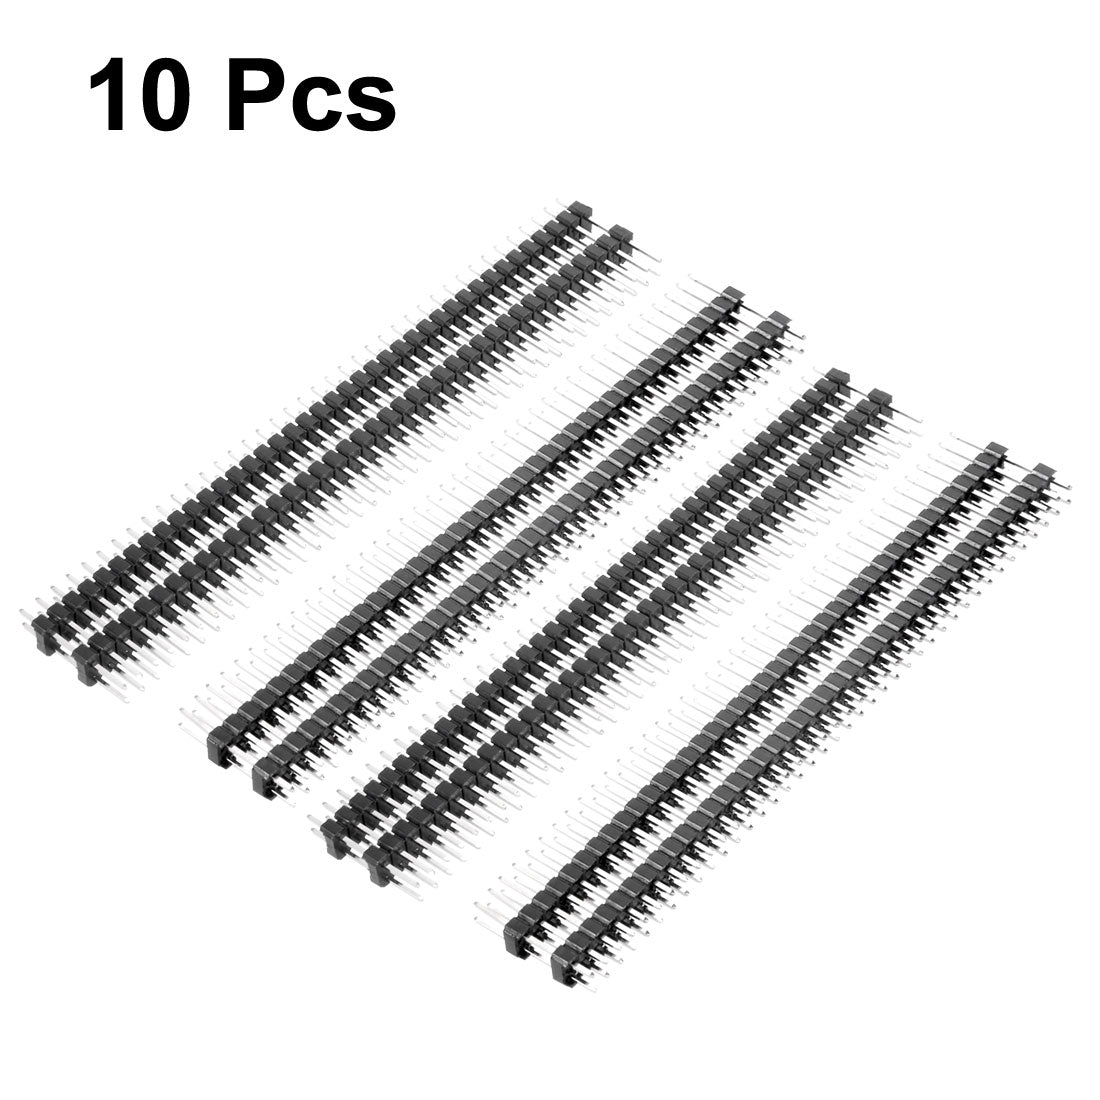 uxcell Uxcell 10Pcs 2.54mm Pitch 40Pin 17mm Length Double Row Straight Connector Pin Header Strip for Arduino Prototype Shield